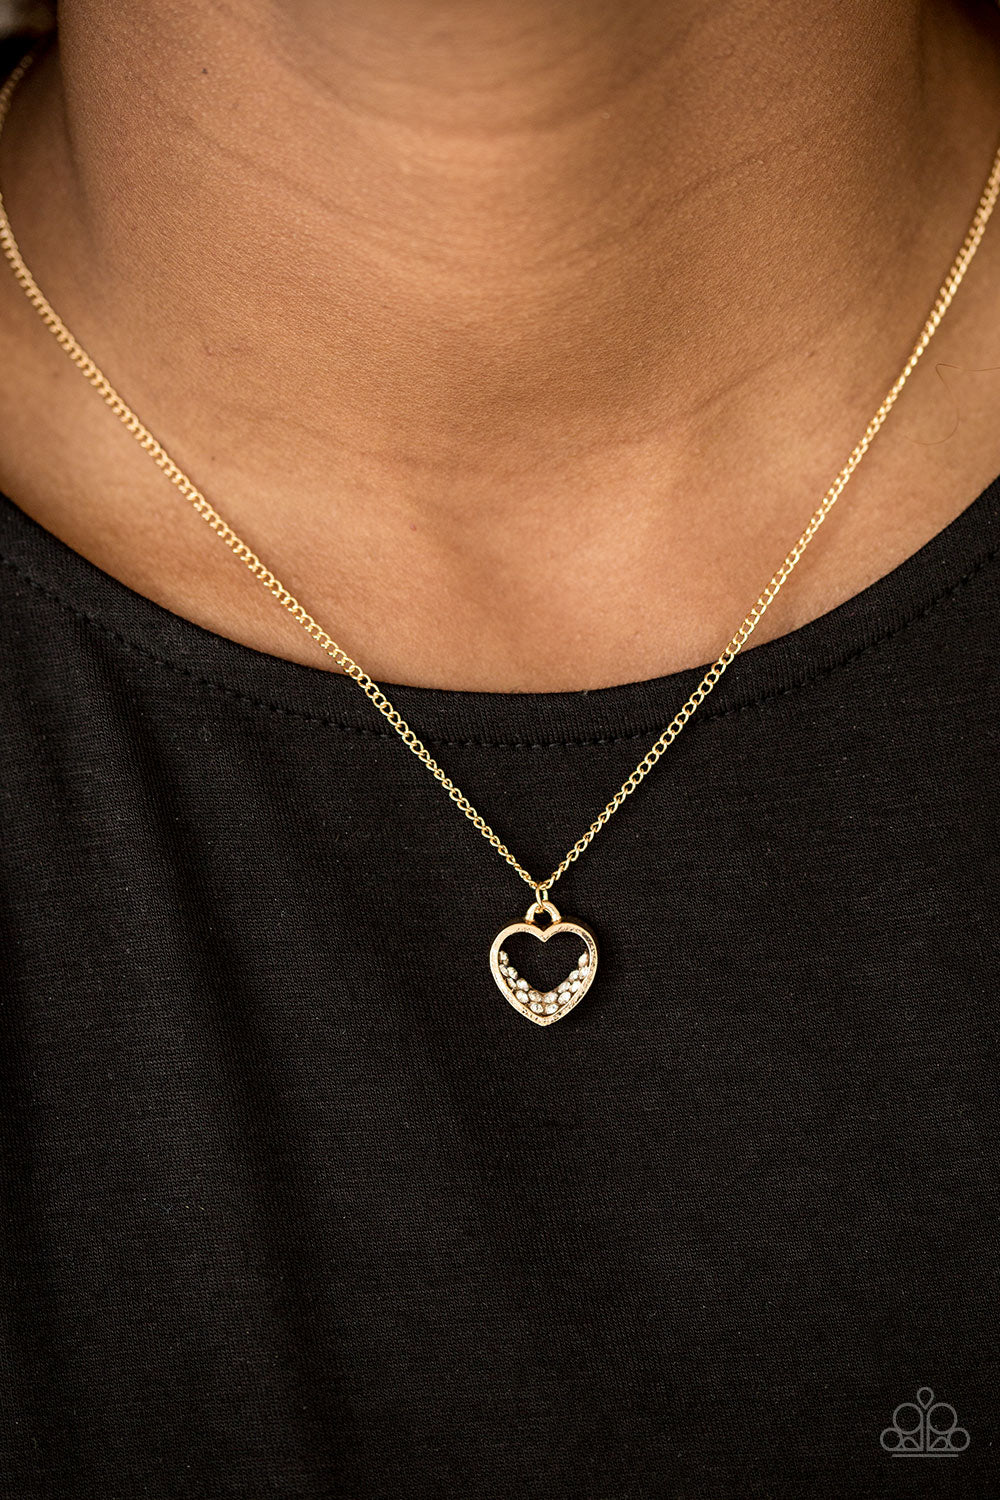 Give Me Love - Gold - Paparazzi necklace